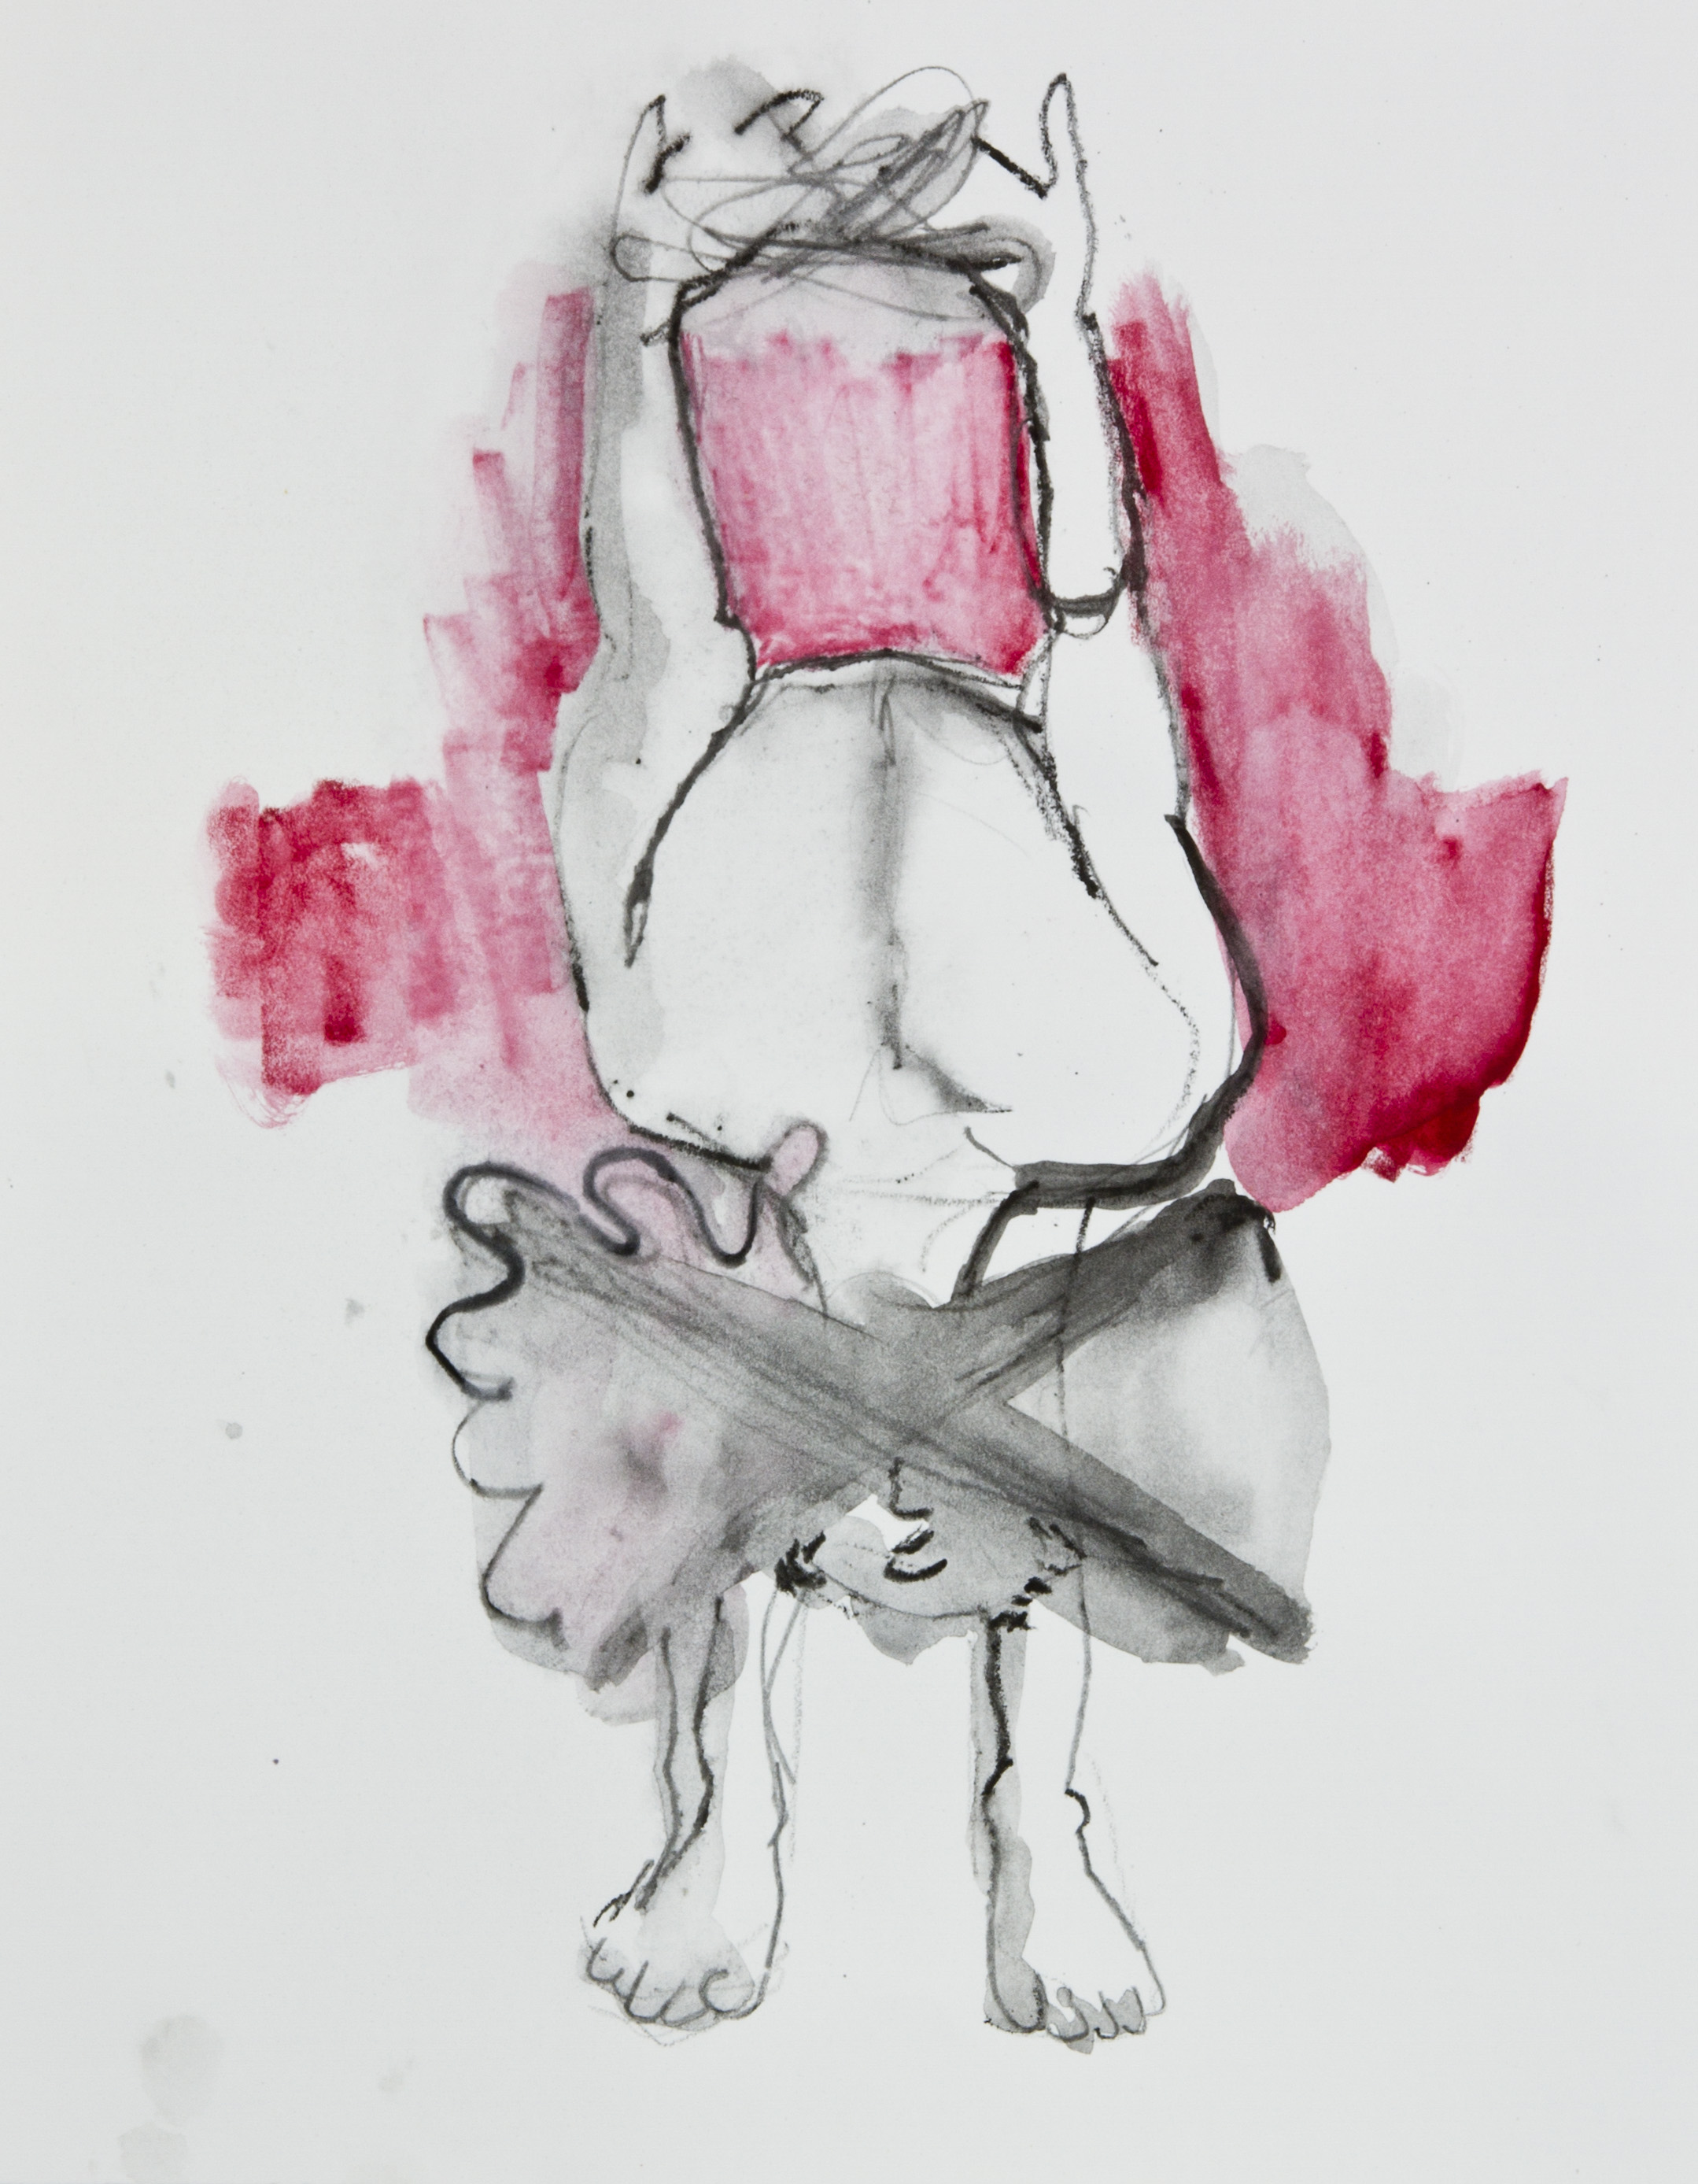 Longer By Stretching It, 2013, graphite, crayon and watercolor pencil on paper, 11x14 inches